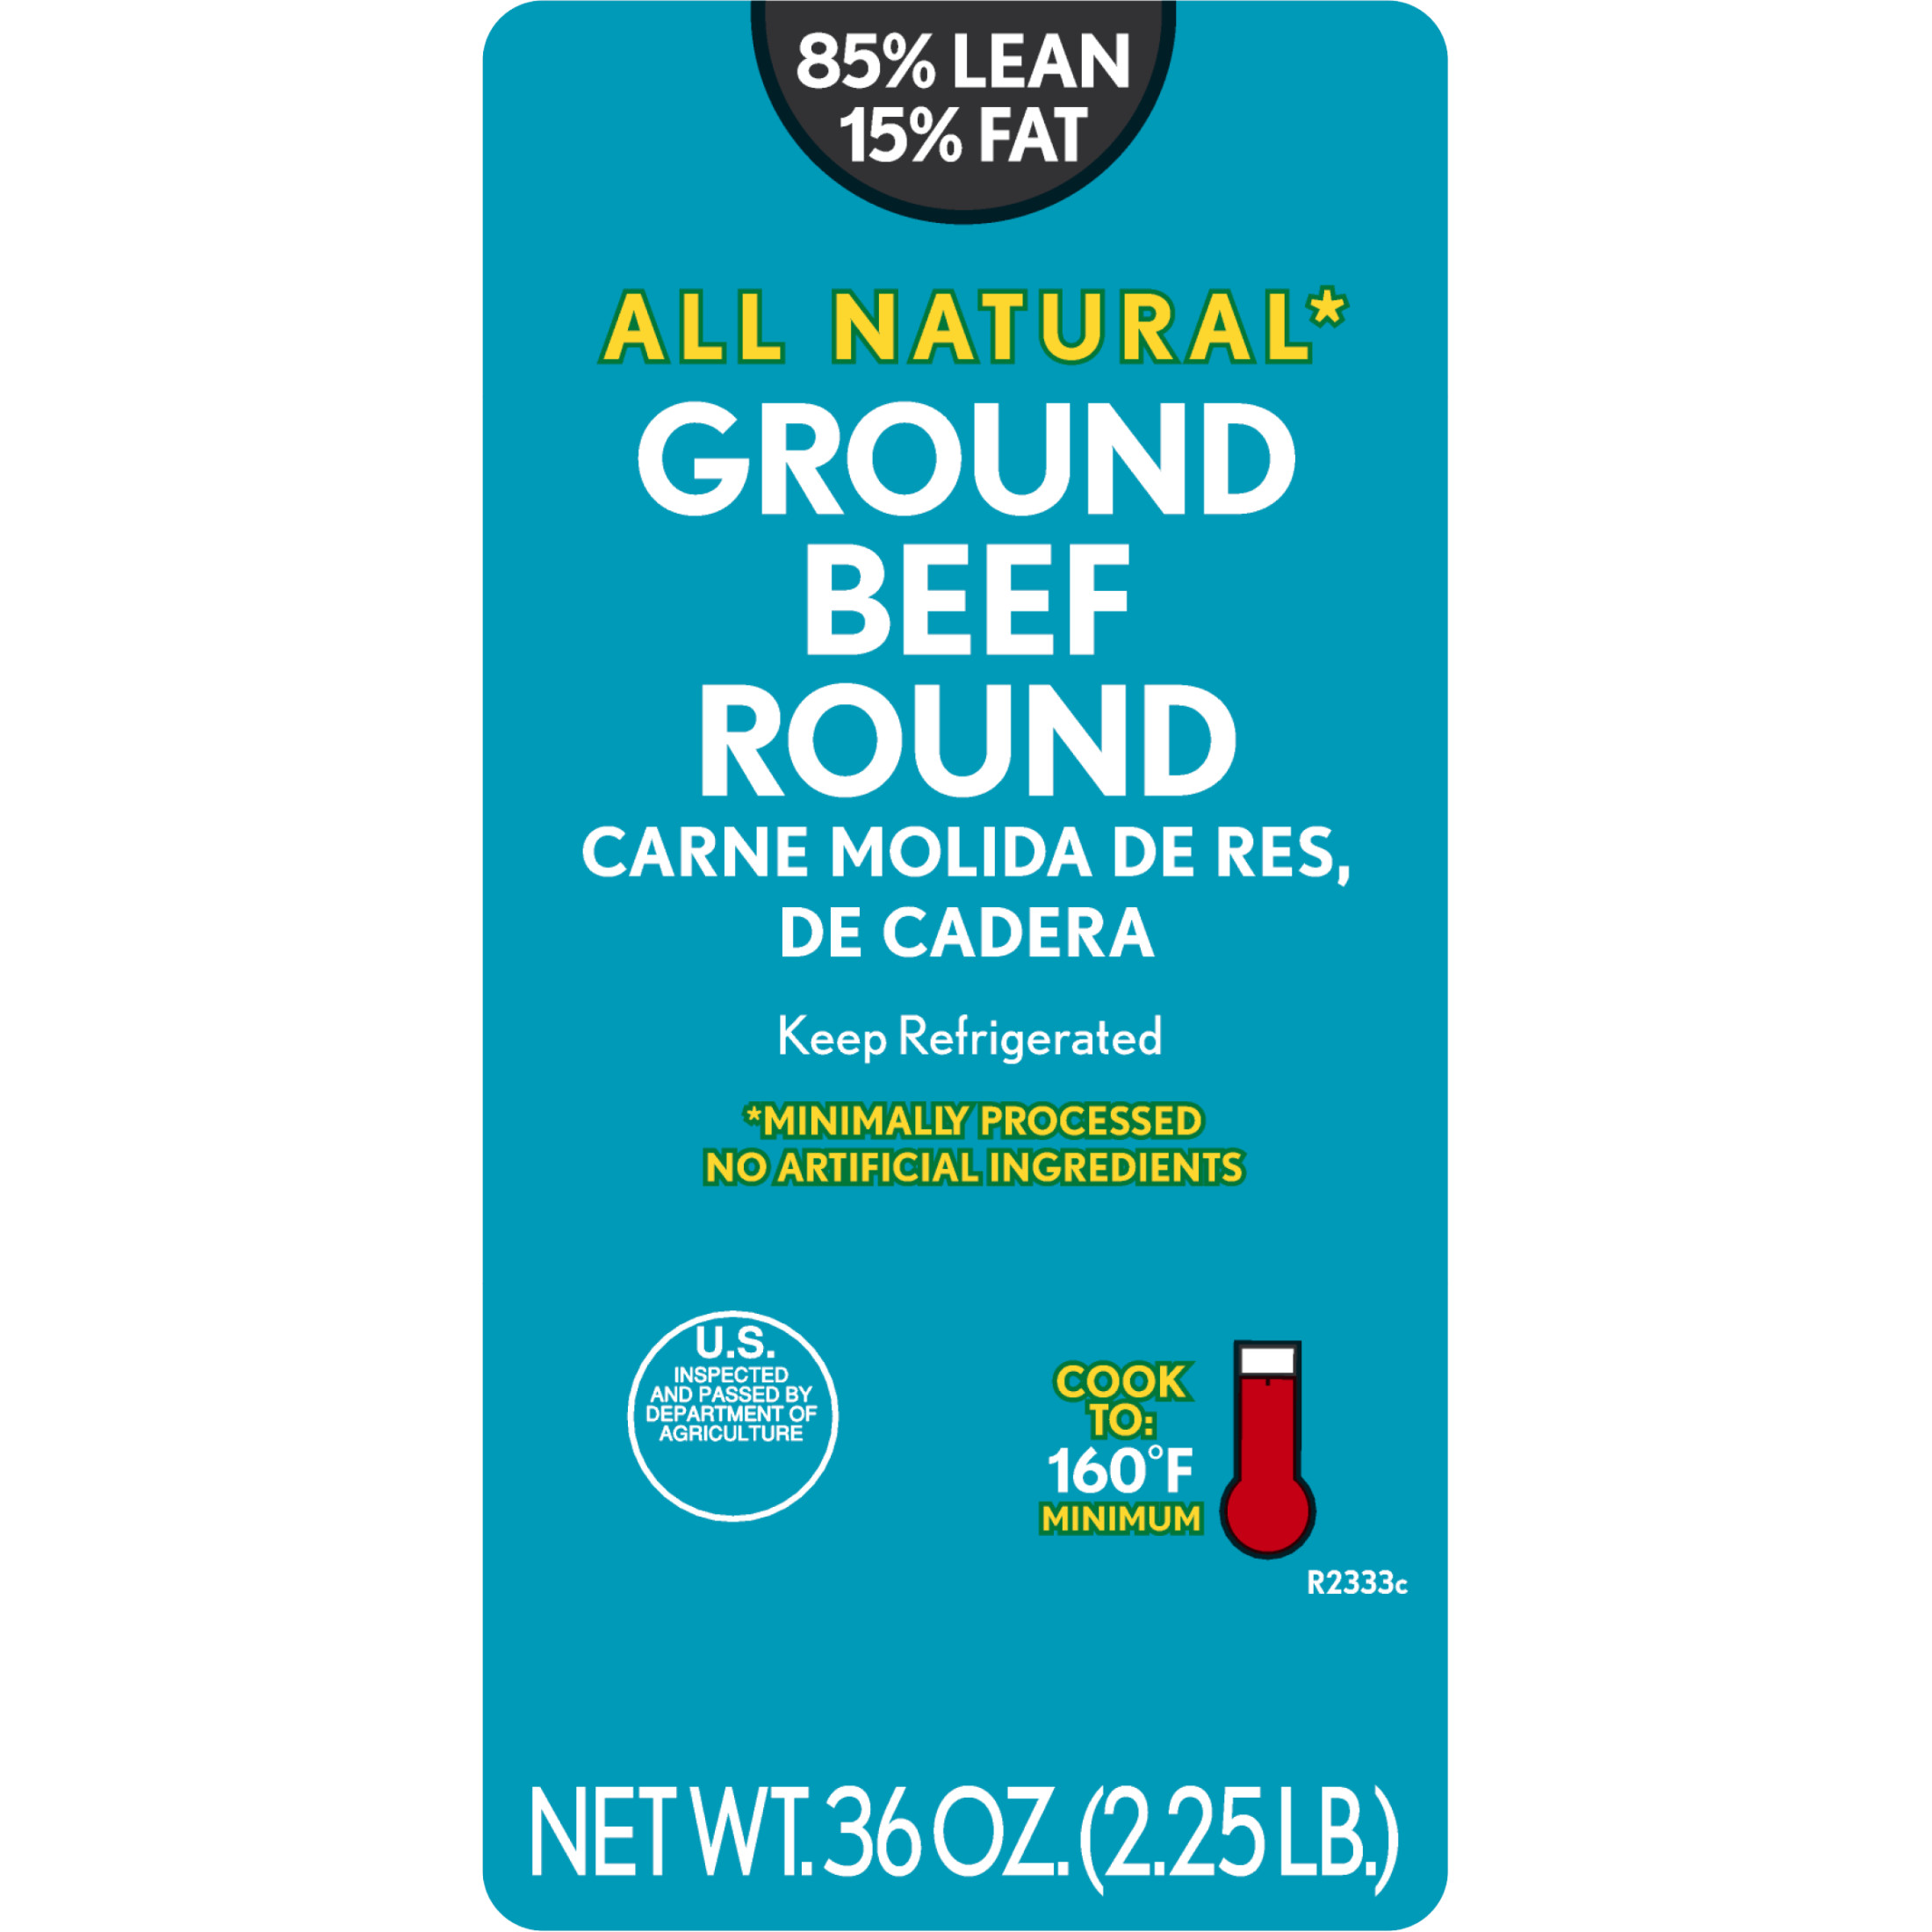 All Natural* 85% Lean/15% Fat Ground Beef Round, 2.25 lb Tray - image 4 of 7